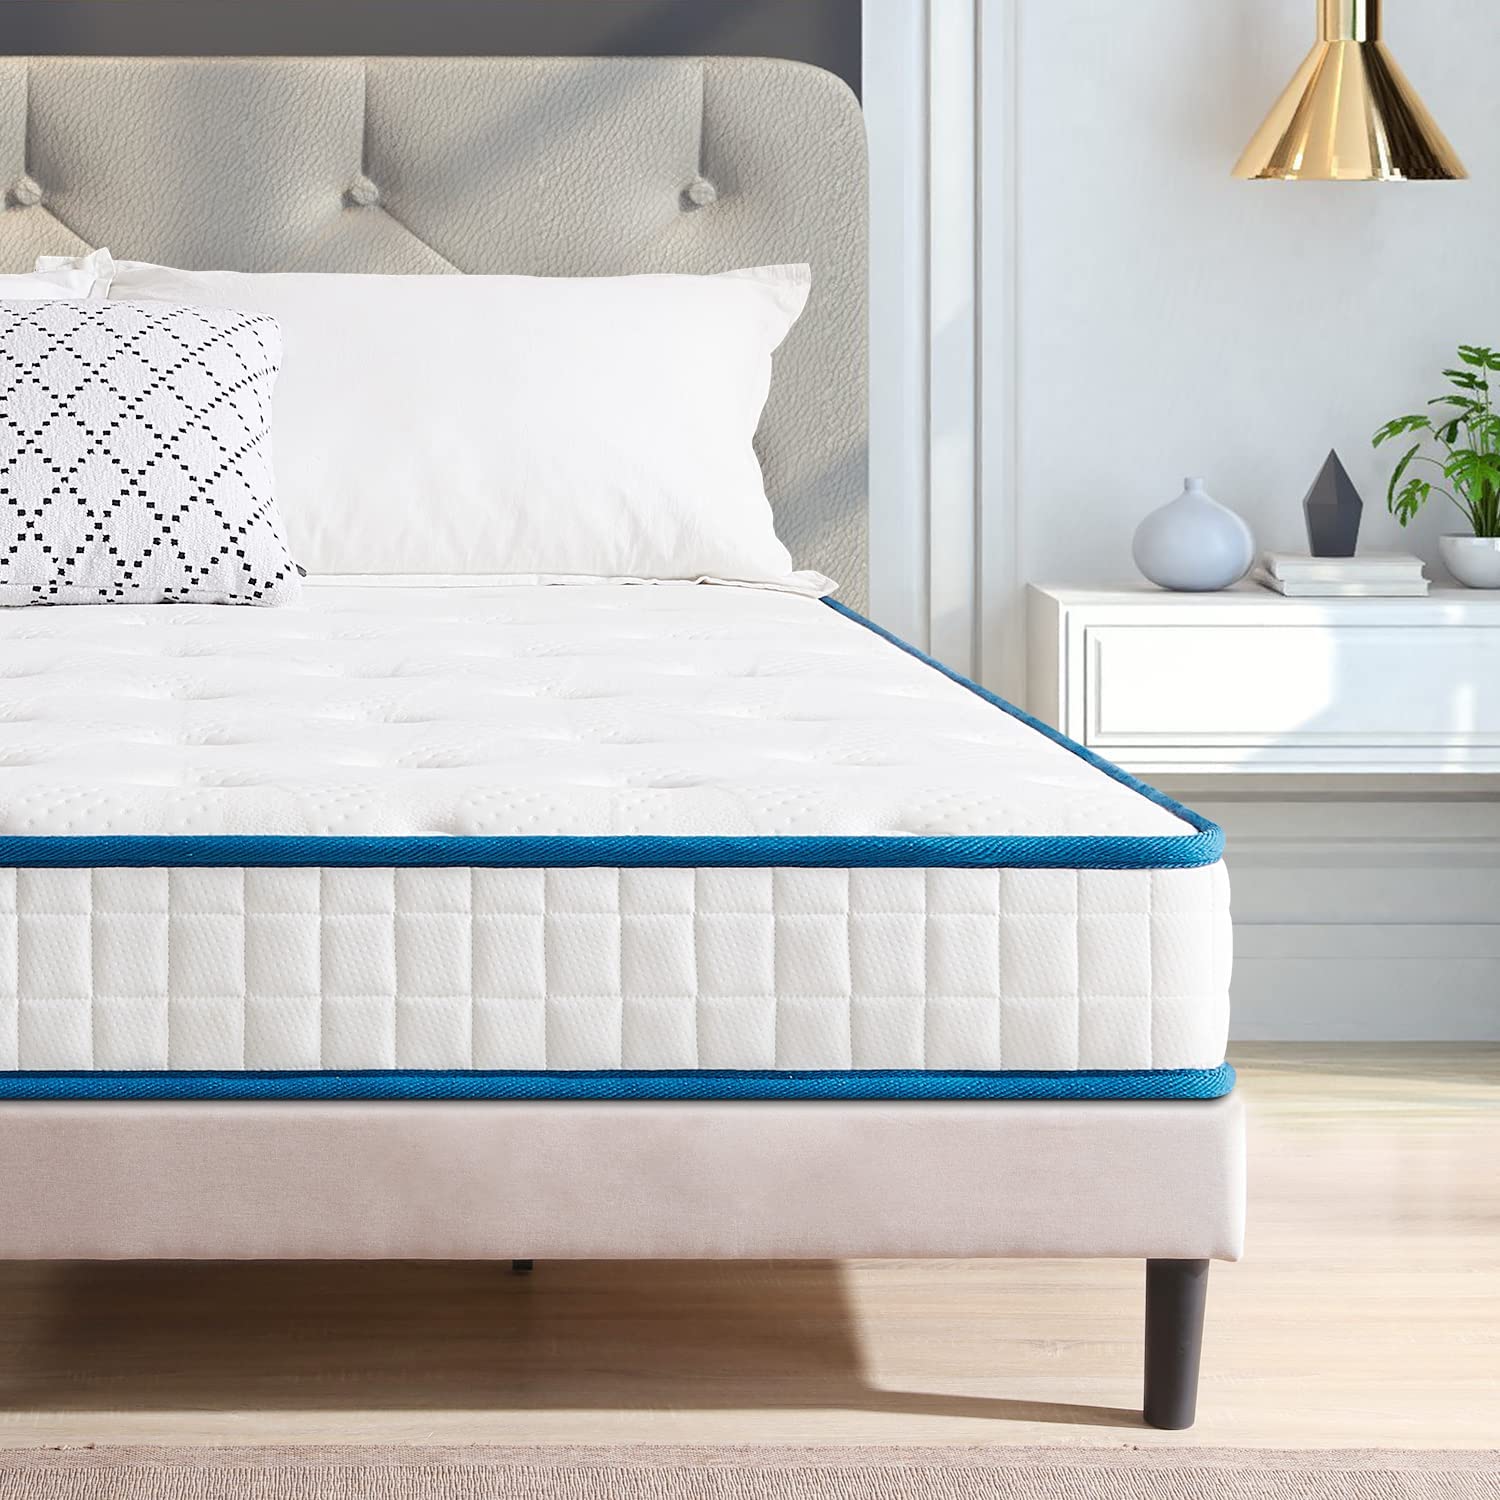 Suilong 16cm Hybrid Mattress - the Perfect Solution for Back Pain Relief and Undisturbed Sleep